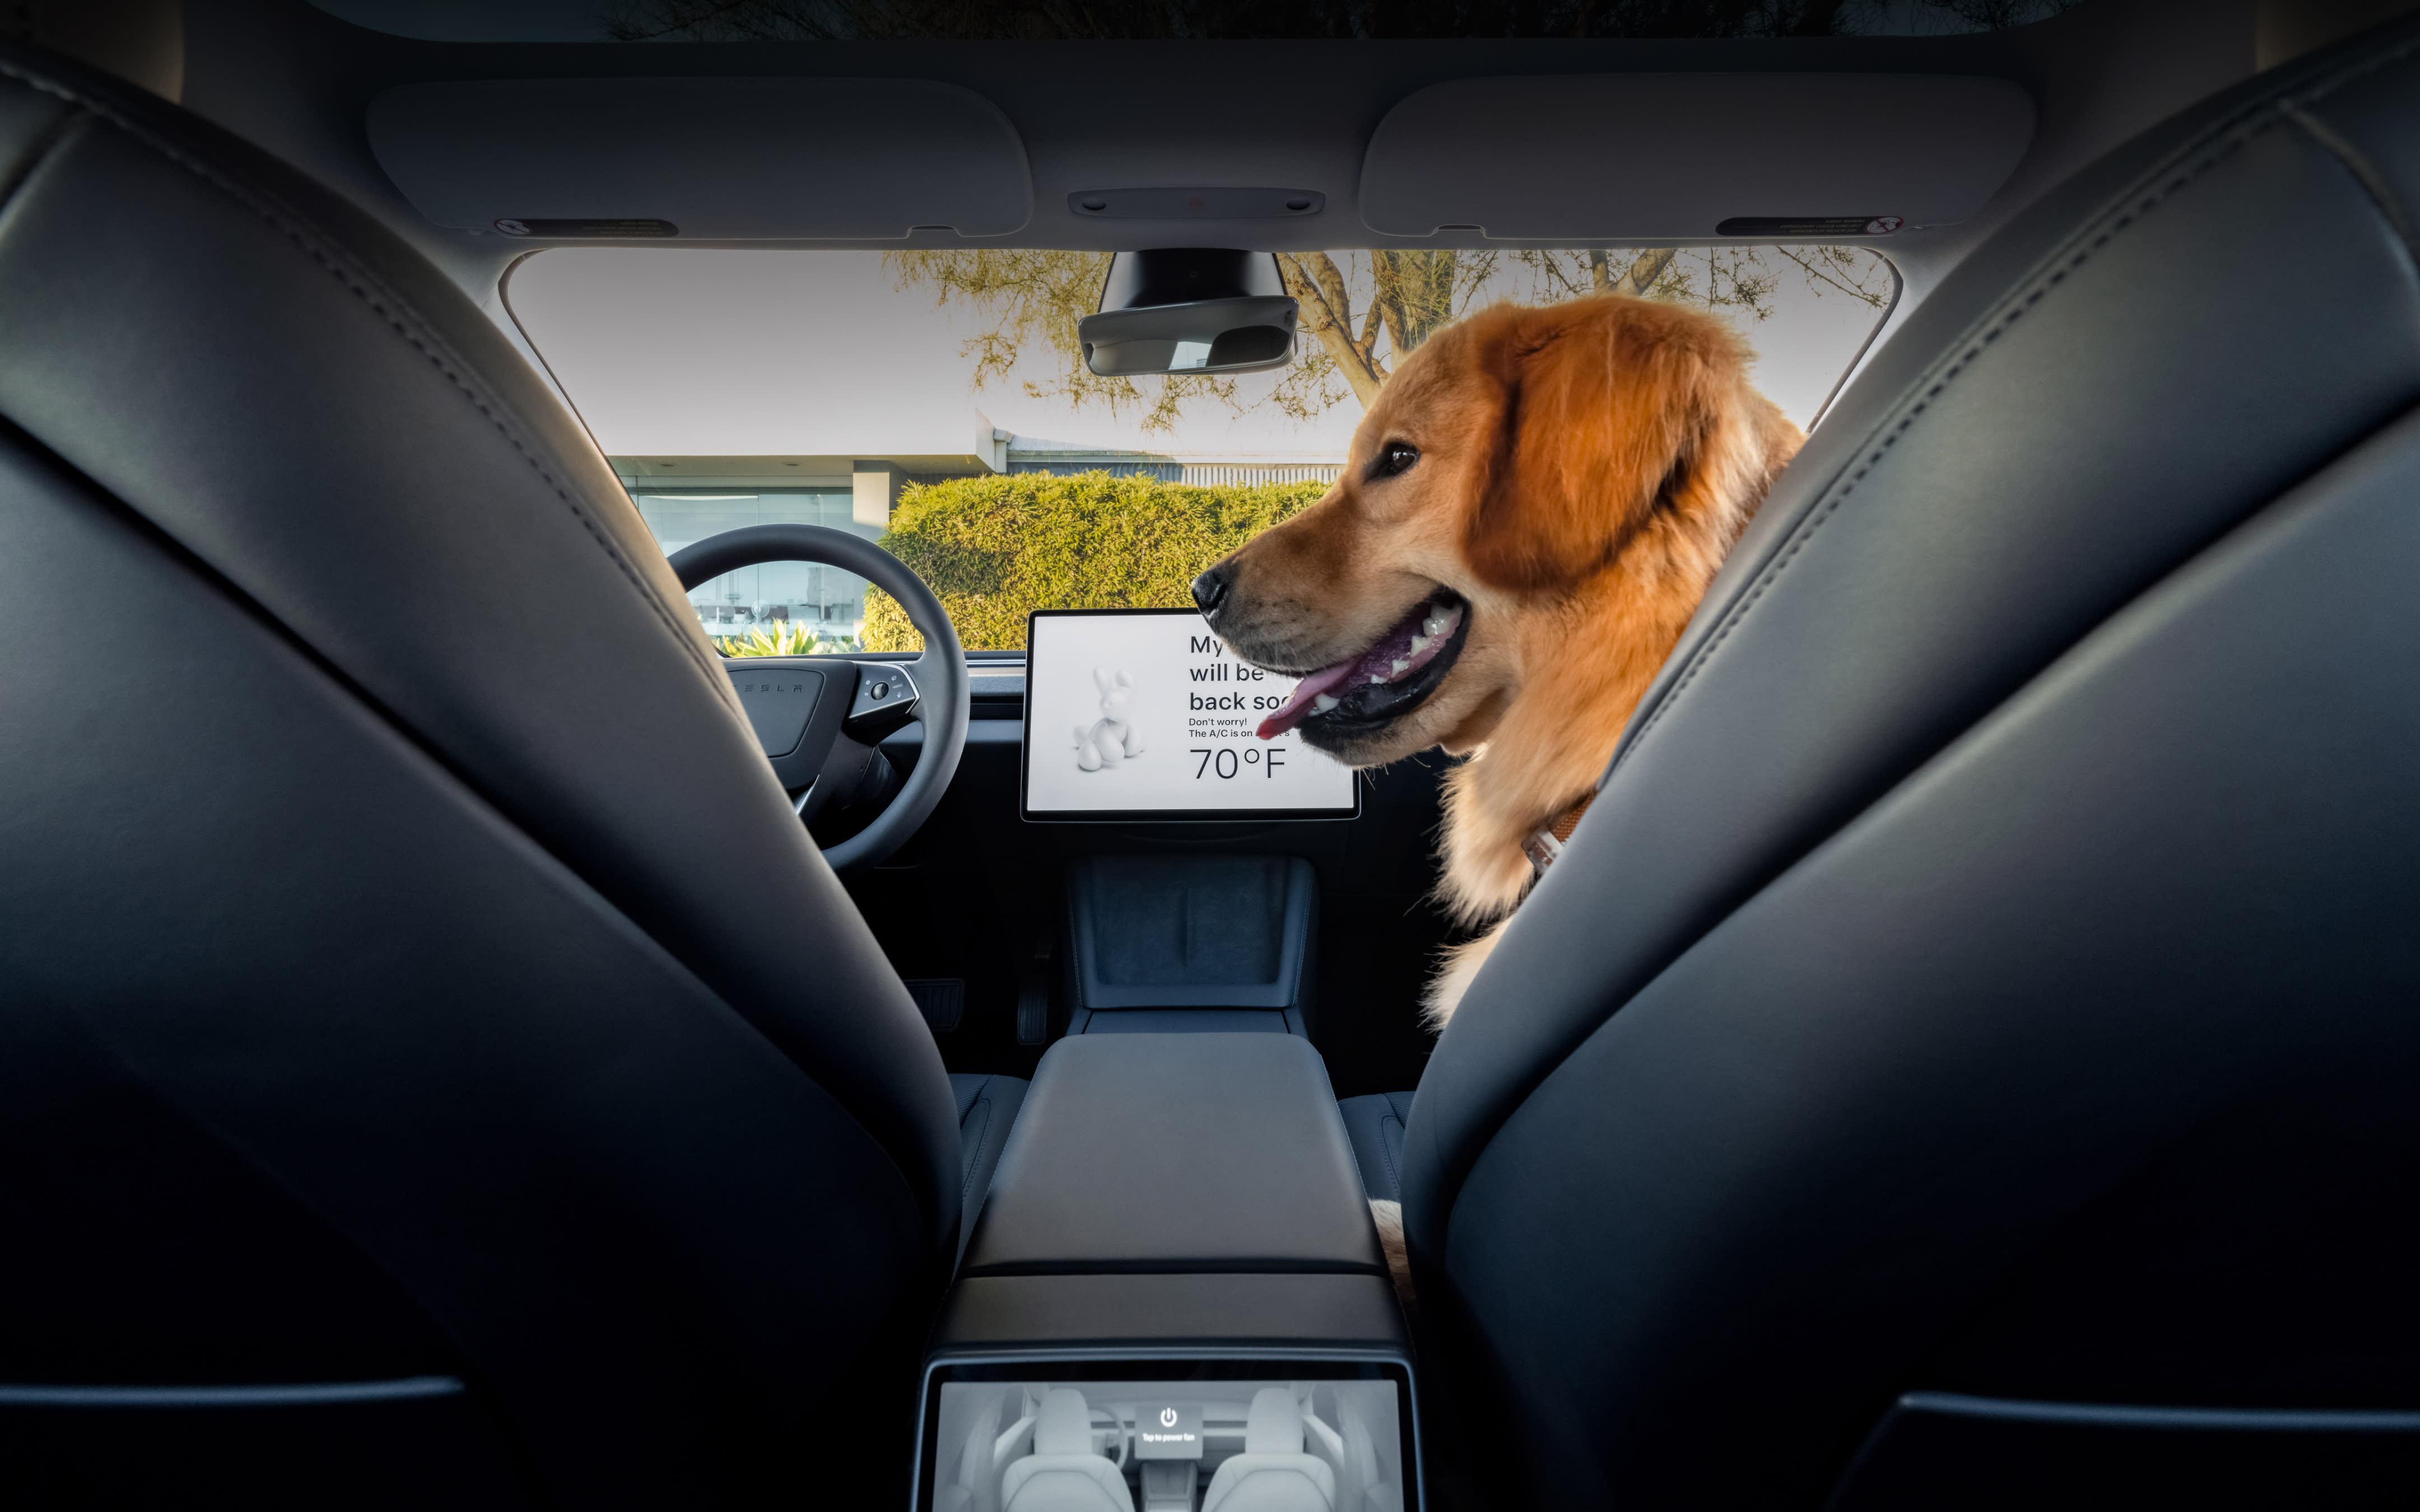 Center touchscreen displaying 'My driver will be back soon' with a golden retriever on the shotgun seat.